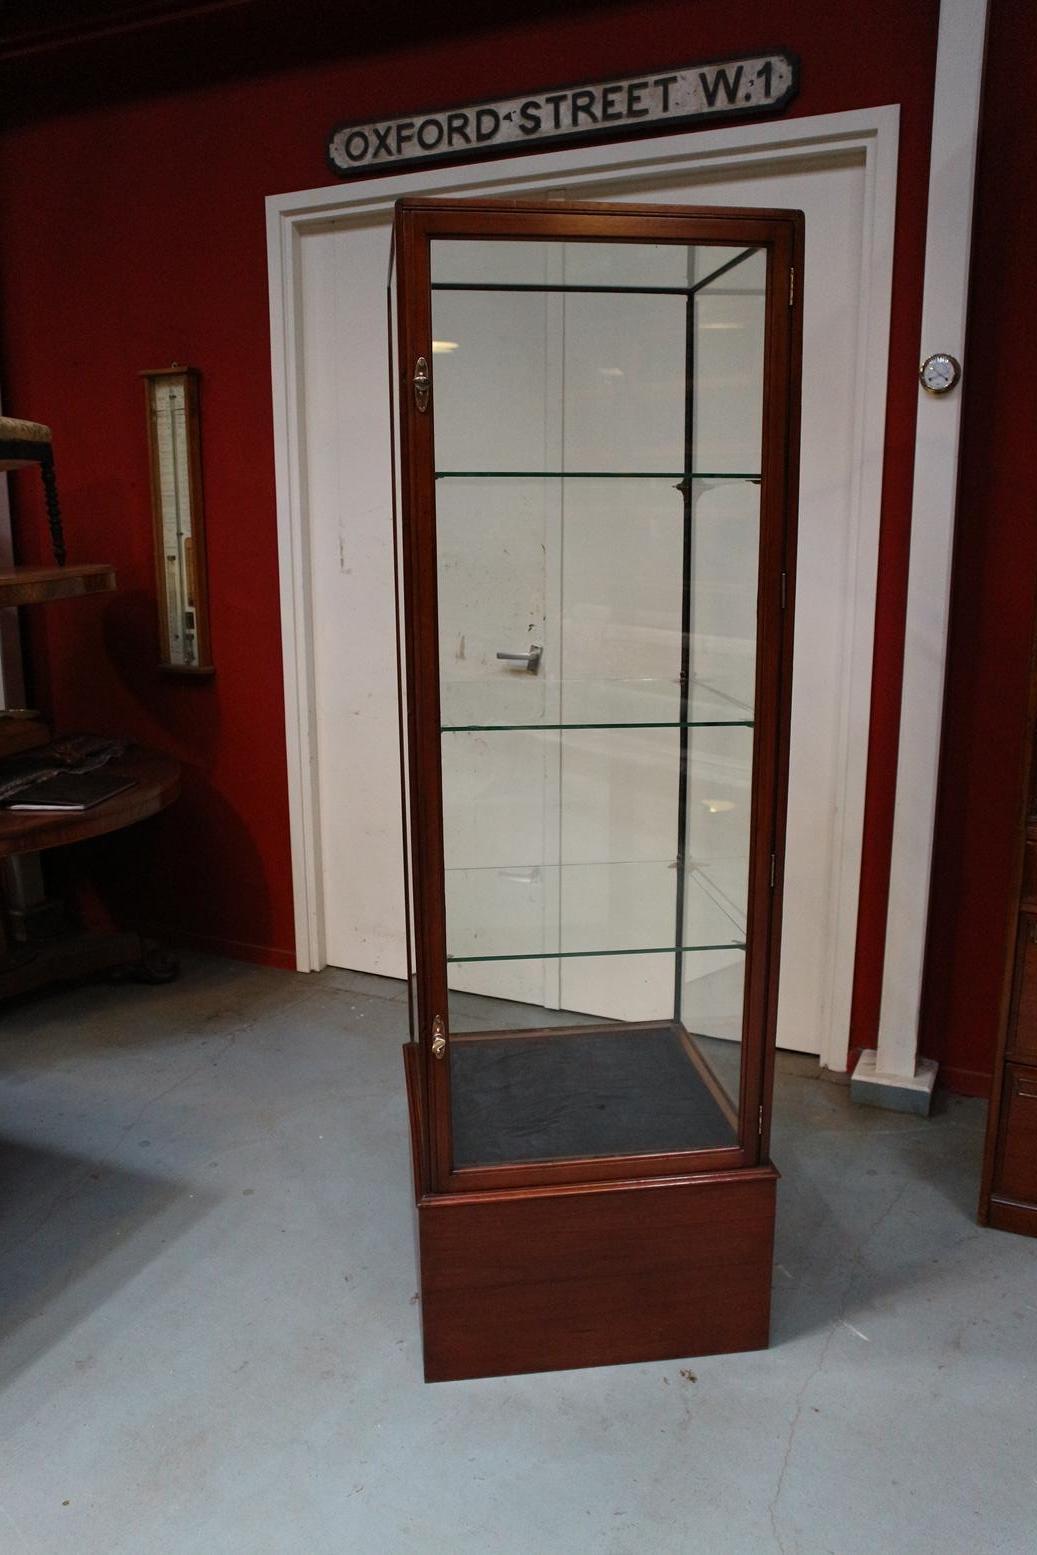 Antique mahogany display case with 3 adjustable glass shelves. Entirely in perfect condition. Everything looks better in this beautiful display case. These types of display cases were previously made especially for the large chic department stores